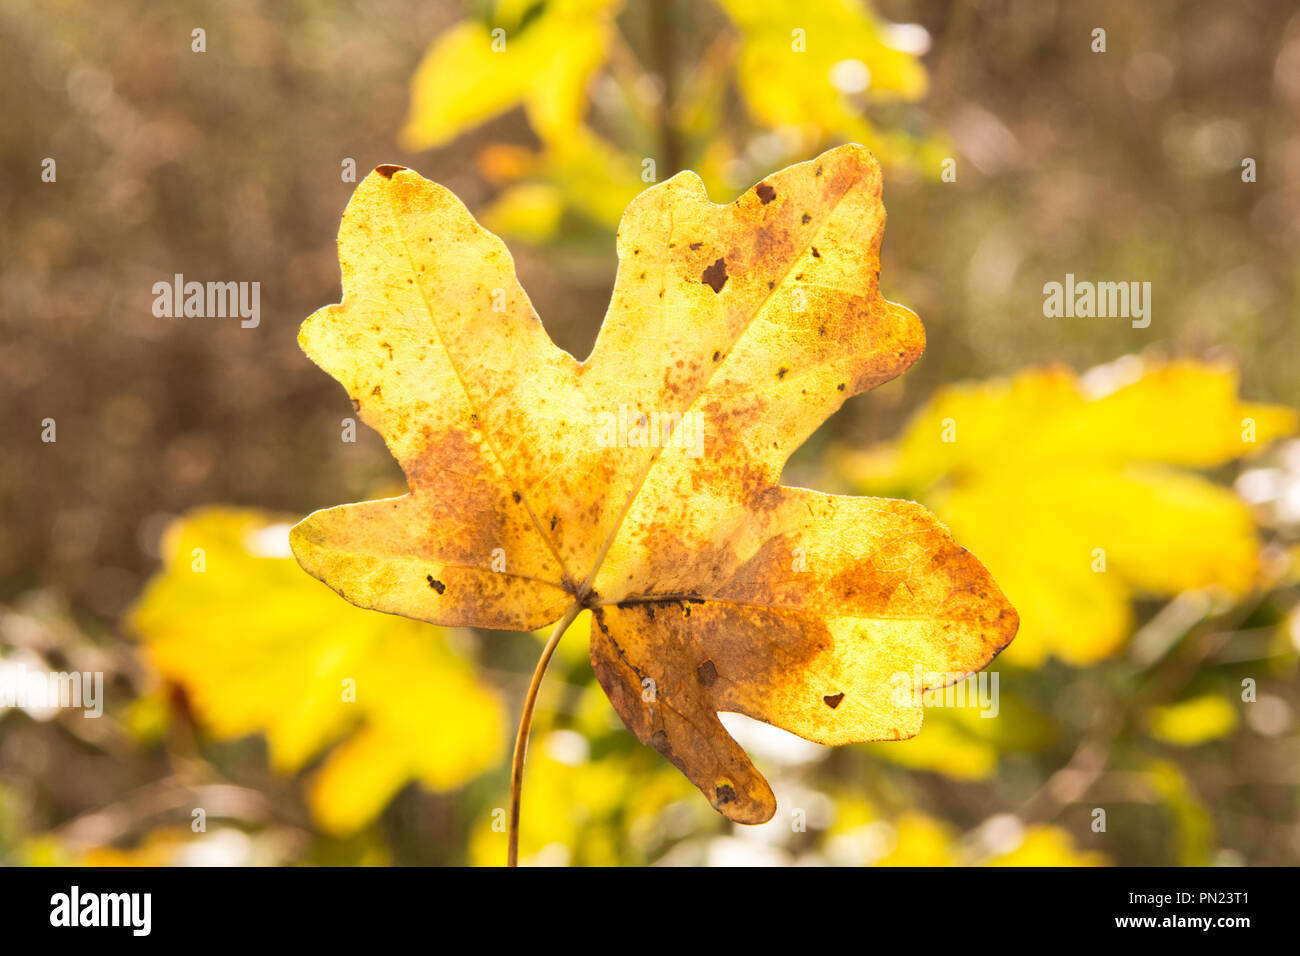 Changing season, leaves turning color and falling Stock Photo